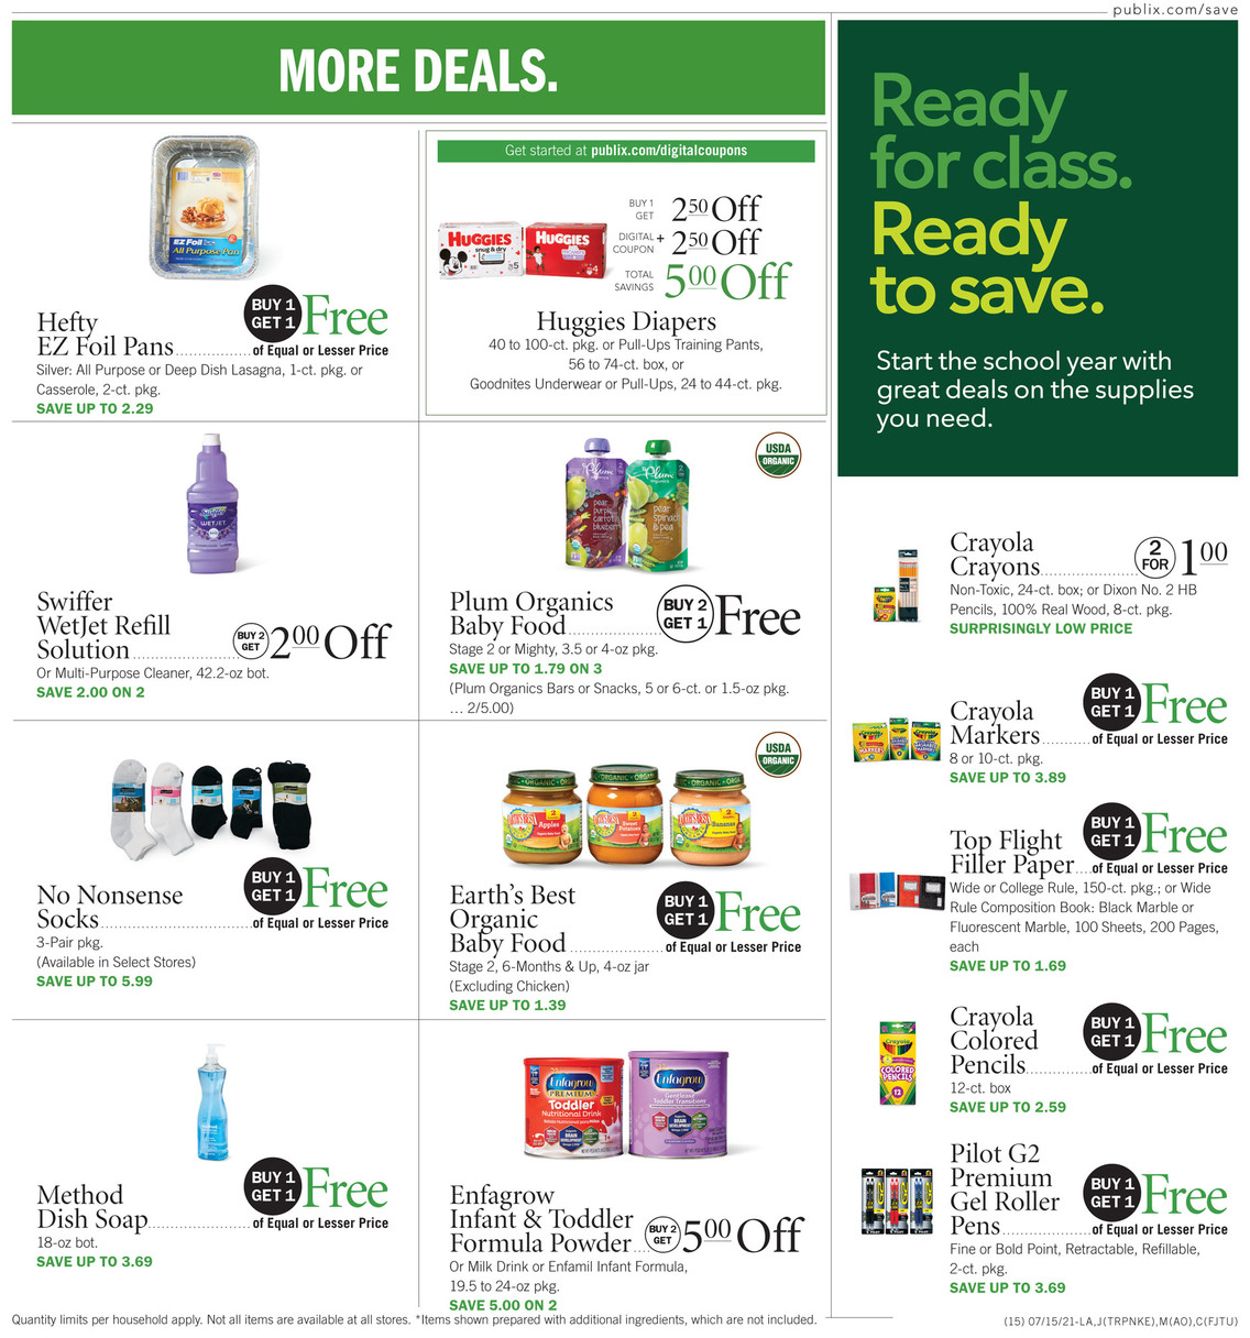 Publix Current weekly ad 07/15 - 07/21/2021 [15] - frequent-ads.com